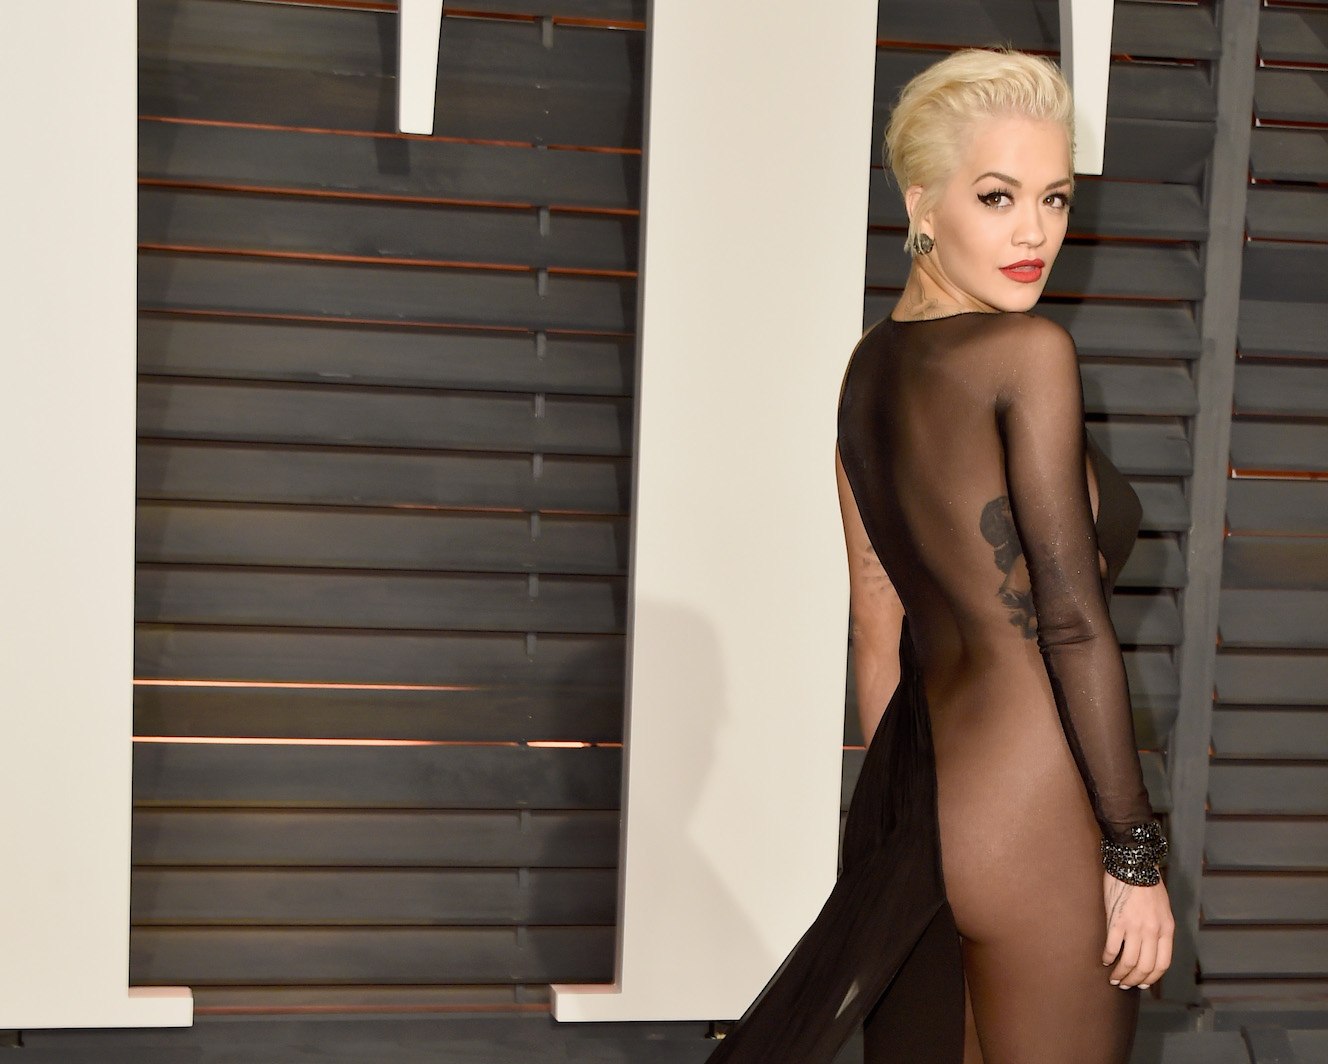 Singer and actress Rita Ora at the 2015 Vanity Fair Oscar Party Hosted By Graydon Carter.